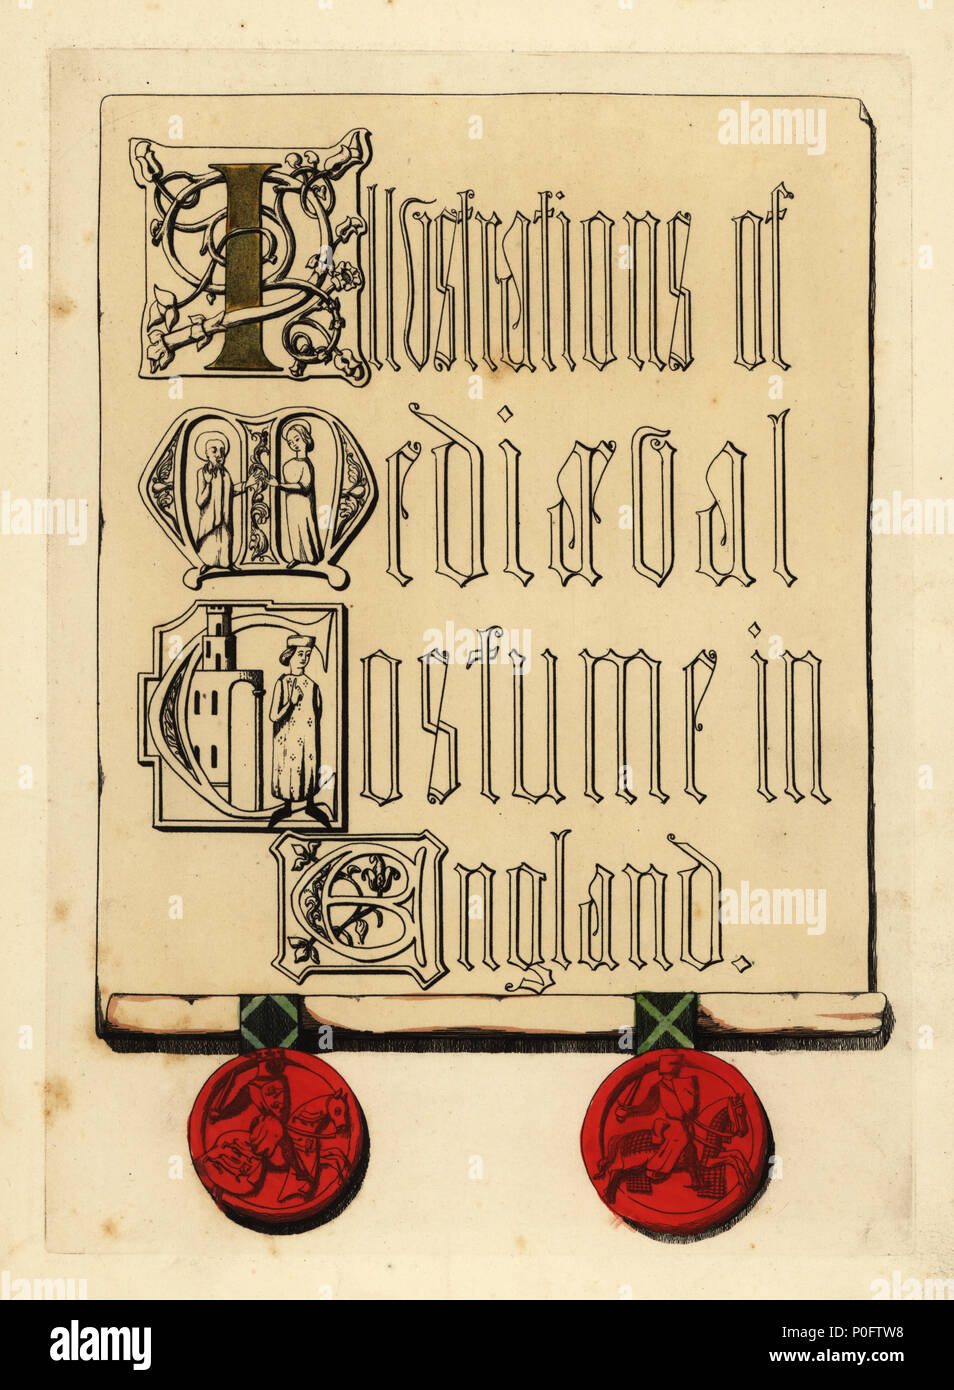 Title page with illuminated lettering and red wax seals. Handcoloured copperplate engraving from Thomas Anthony Day and J.H. Dines' Illustrations of Mediaeval Costume in England collected from manuscripts in the British Museum, Bibliotheque Nationale de Paris, Bosworth, London, 1853. Stock Photo